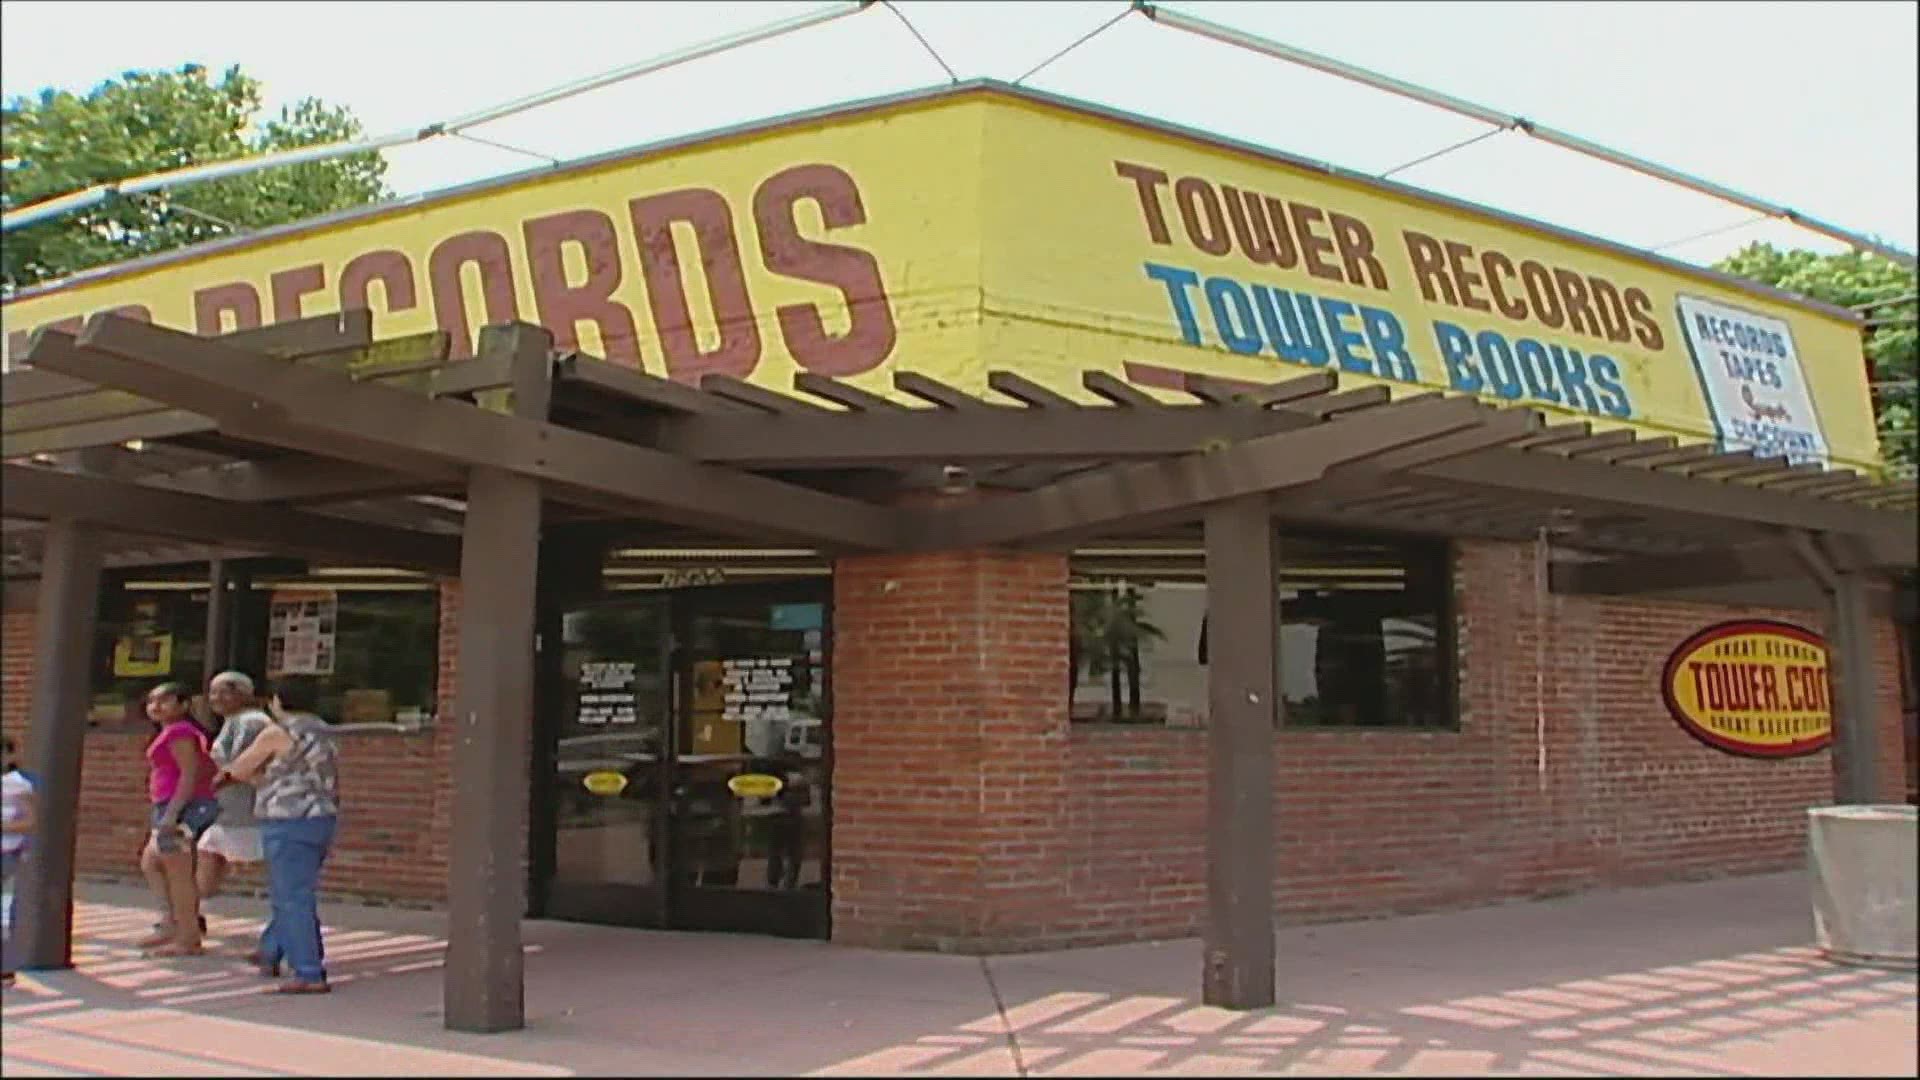 In an age of digital music streaming and the coronavirus pandemic, Tower Records has returned as an online music store.